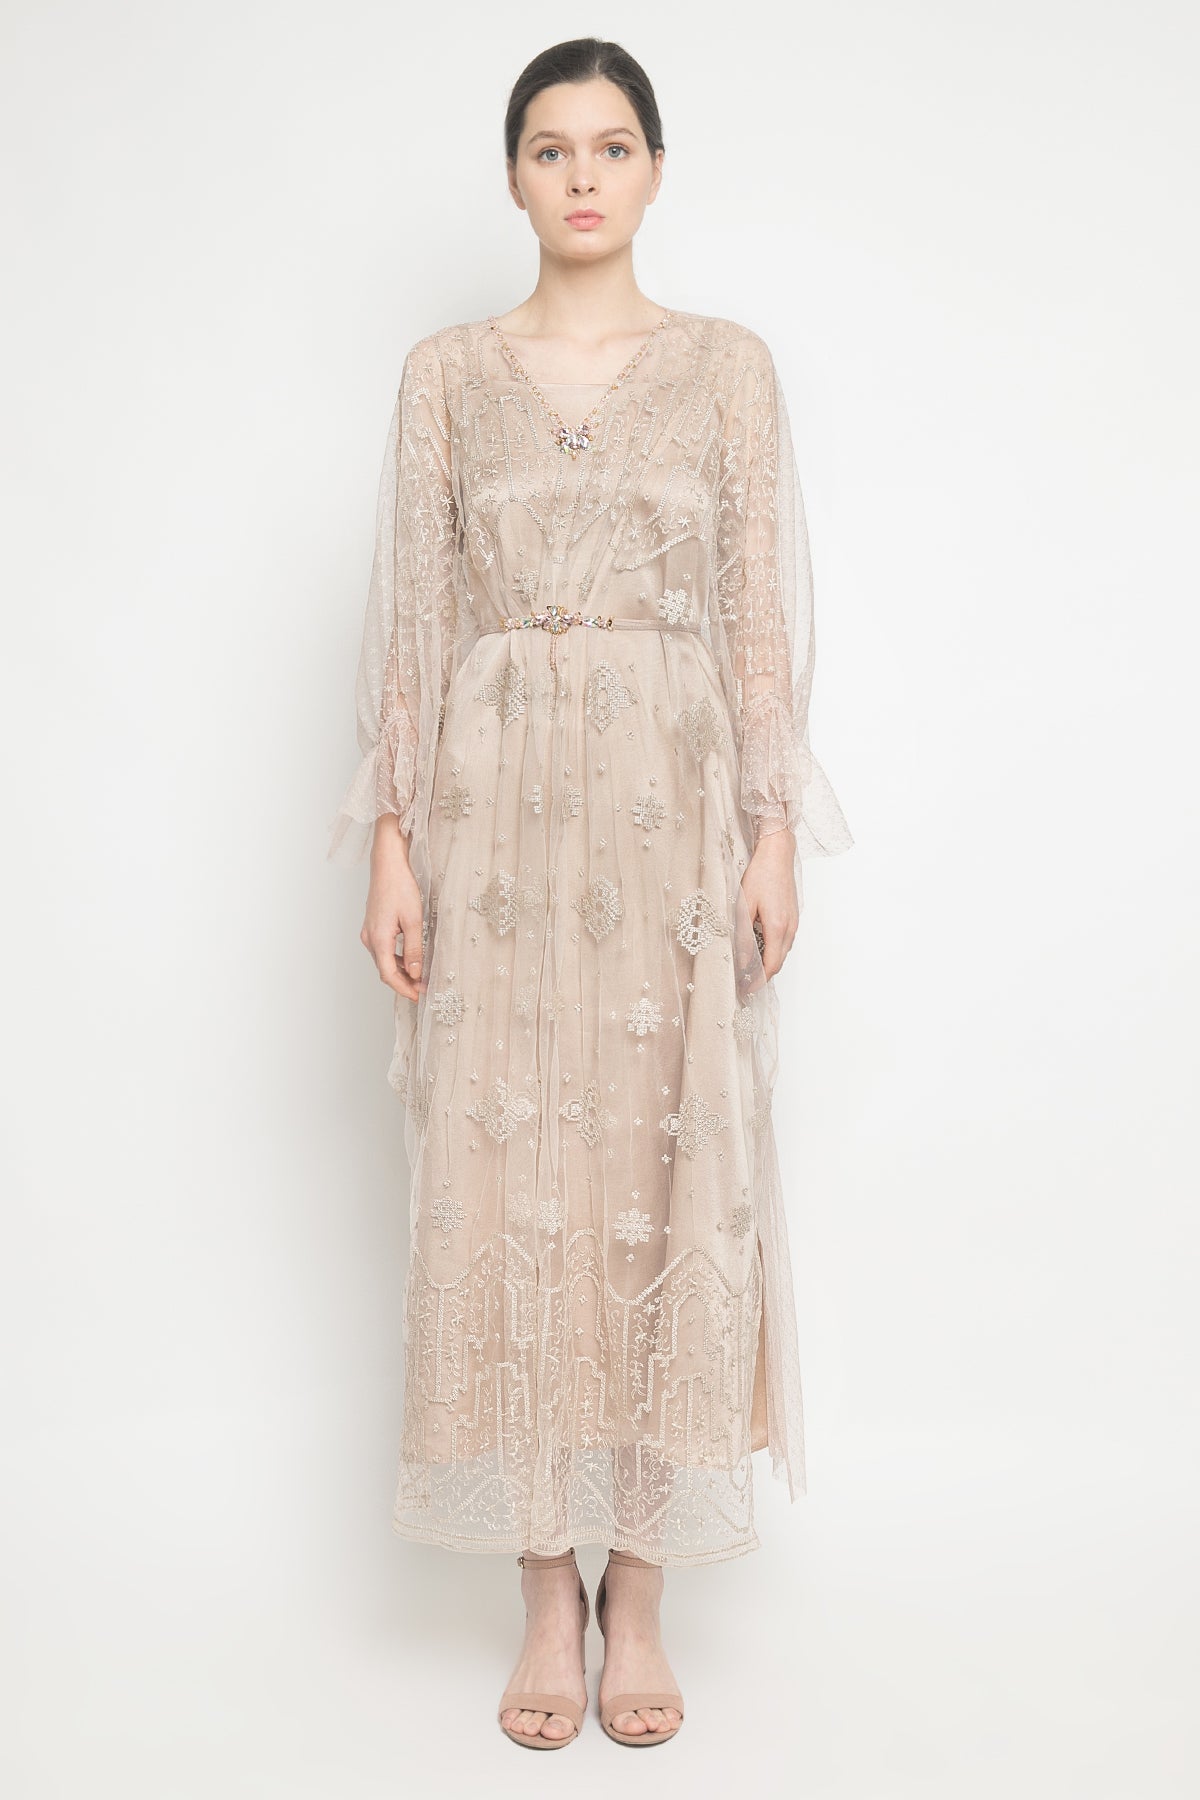 Zhafira Dres in Nude